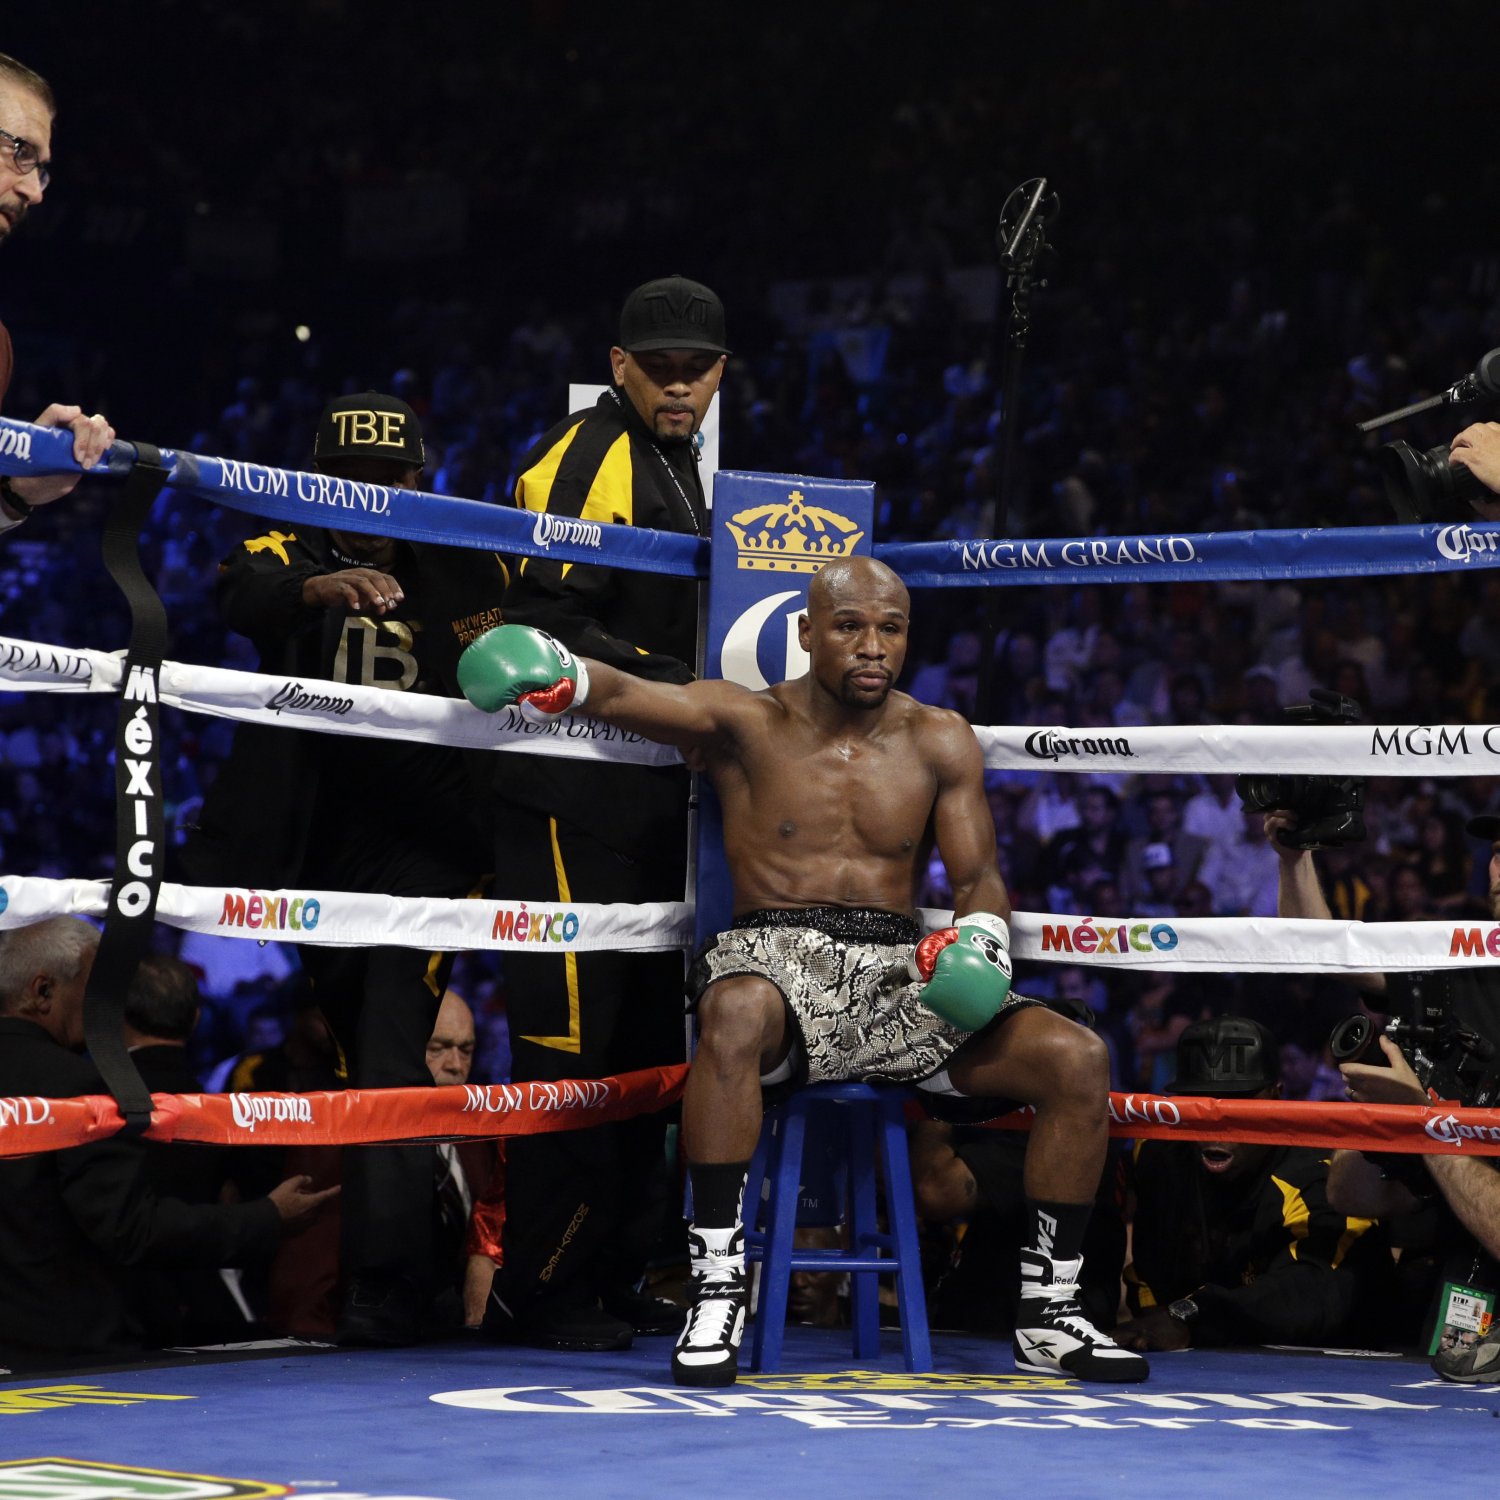 Floyd Mayweather's Record Must Be Tested by Tougher Opponent in Next